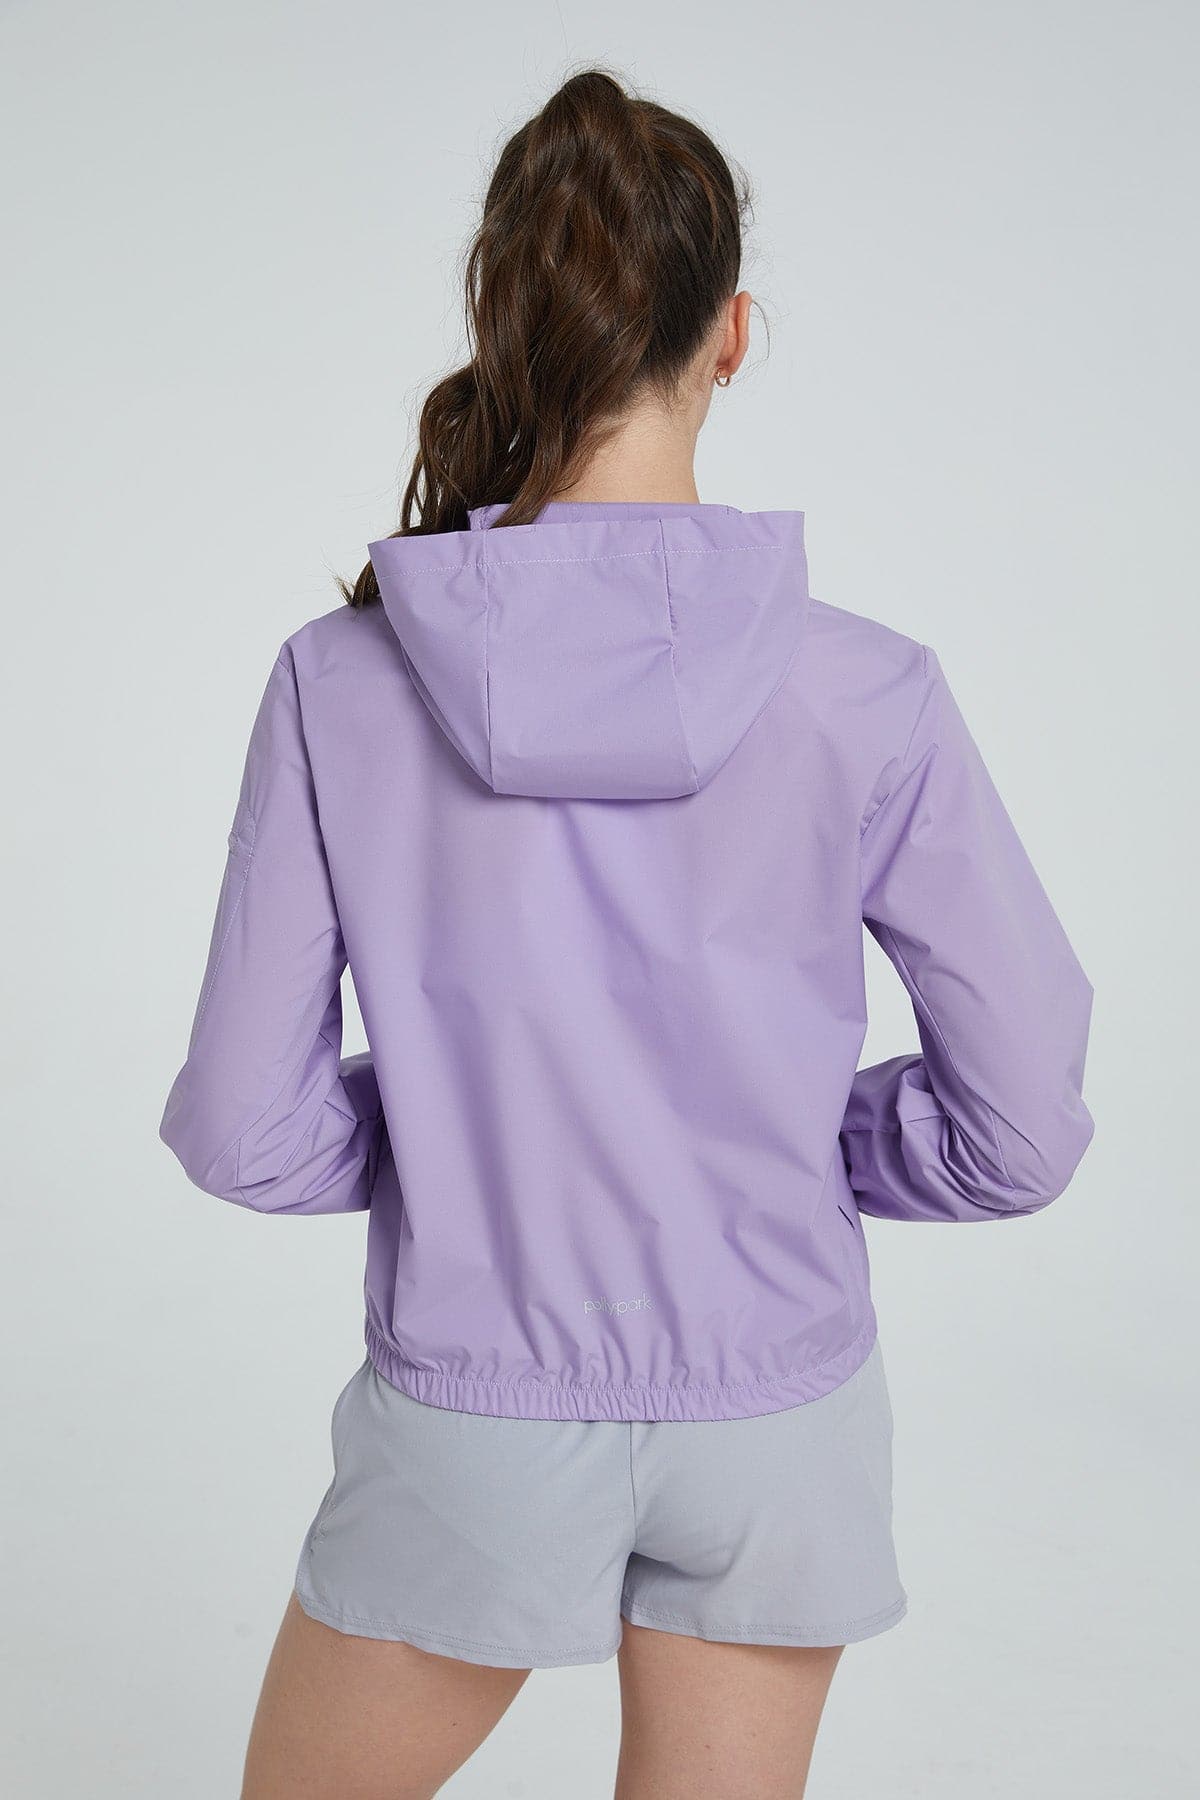 https://pollypark.com/products/easy-running-windbreaker-rose-purple?_pos=2&_sid=8e98e4956&_ss=r